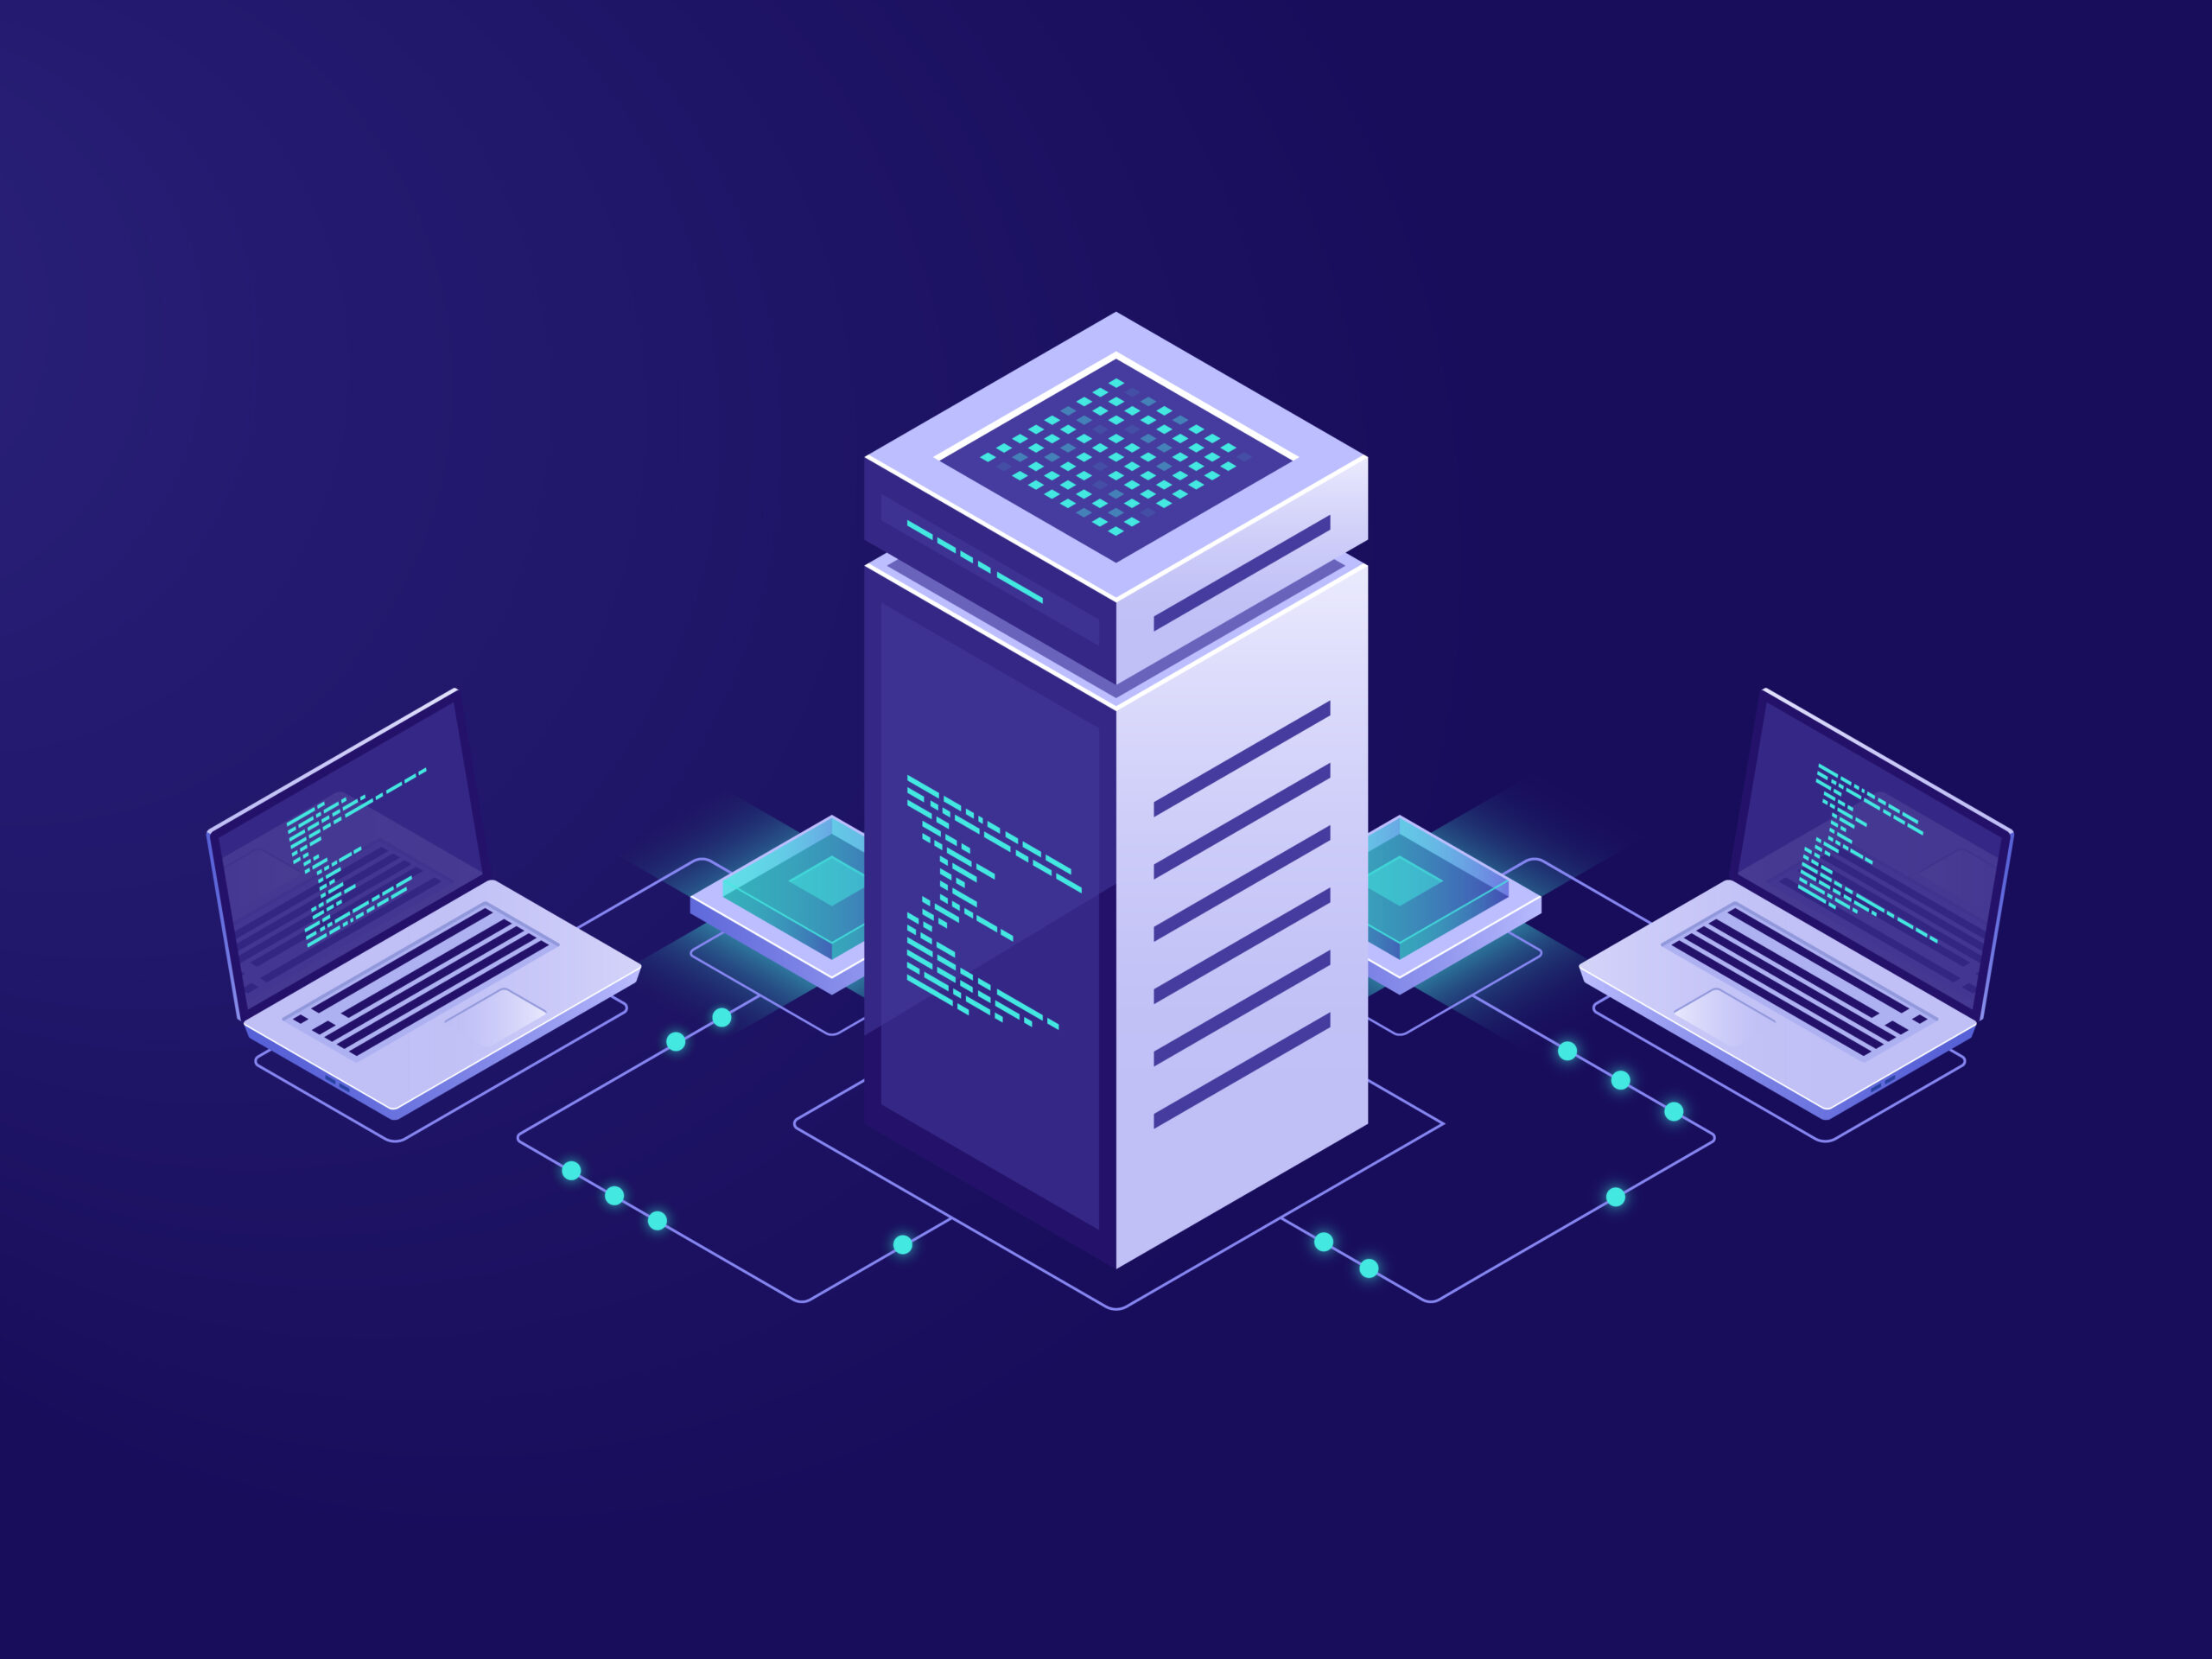 Big data processing concept, server room, blockchain technology token access, data center and database, network connection isometric illustration vector neon dark